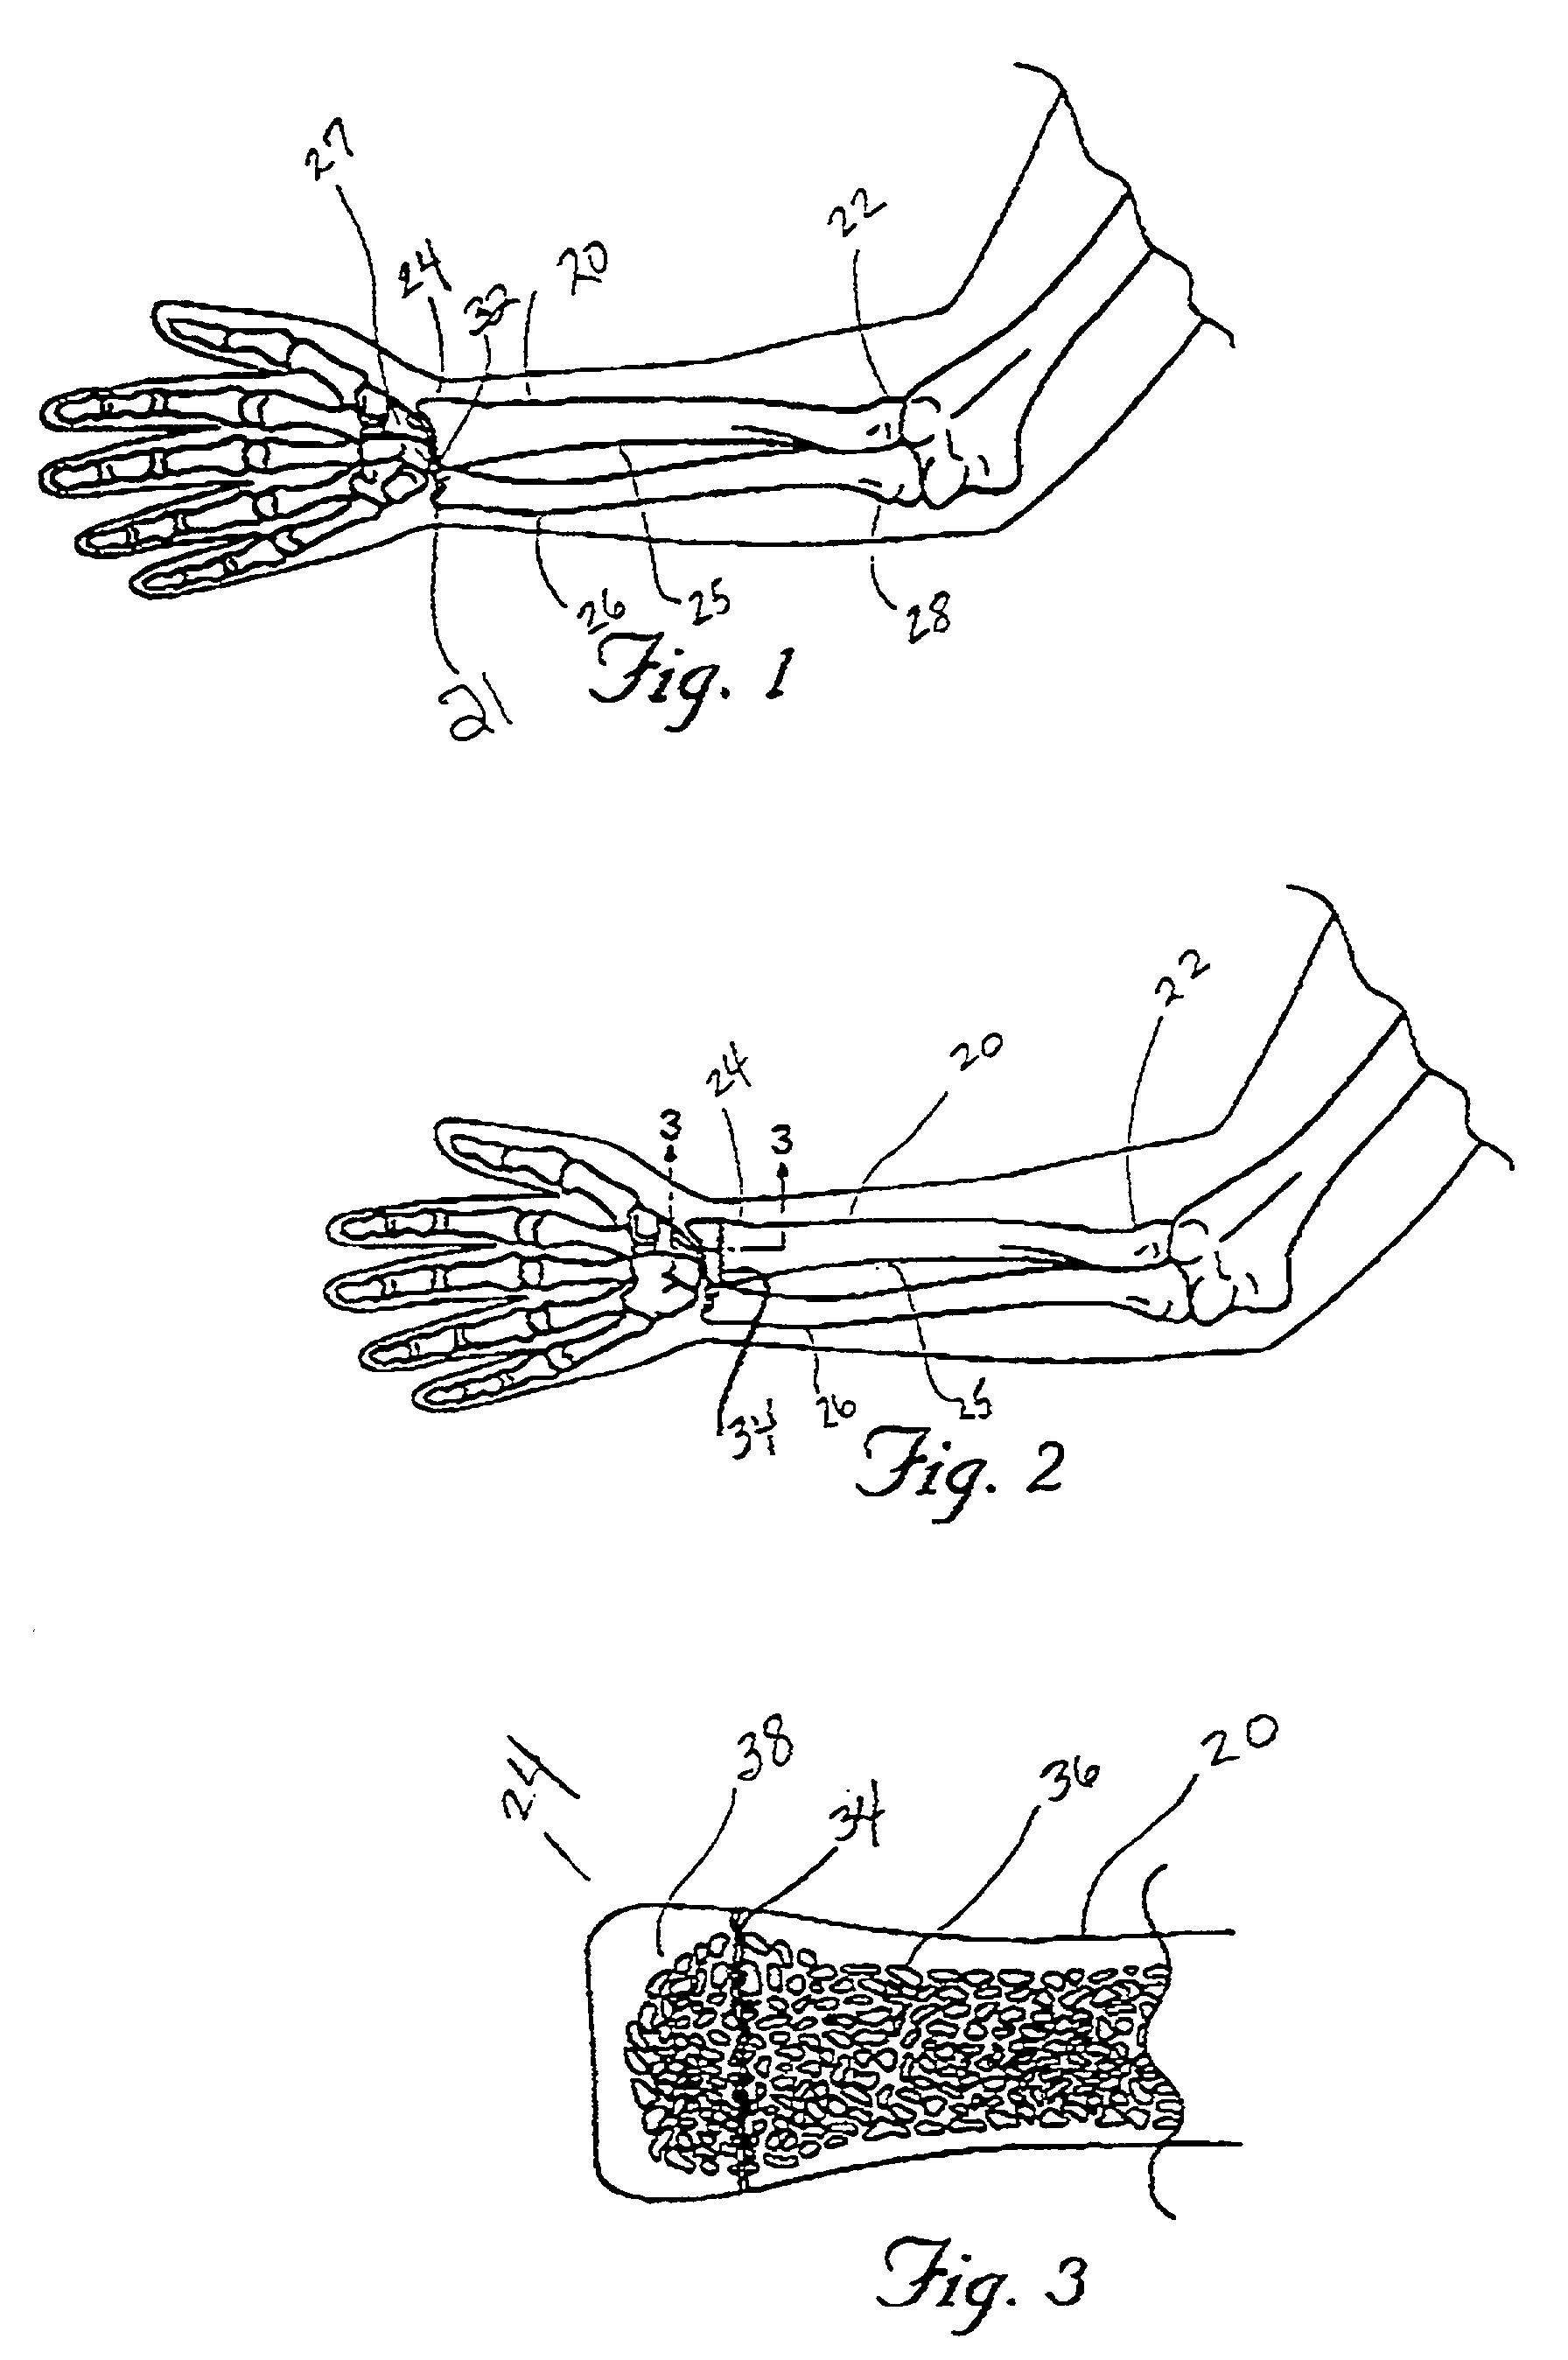 Systems and methods for reducing fractured bone using a fracture reduction cannula